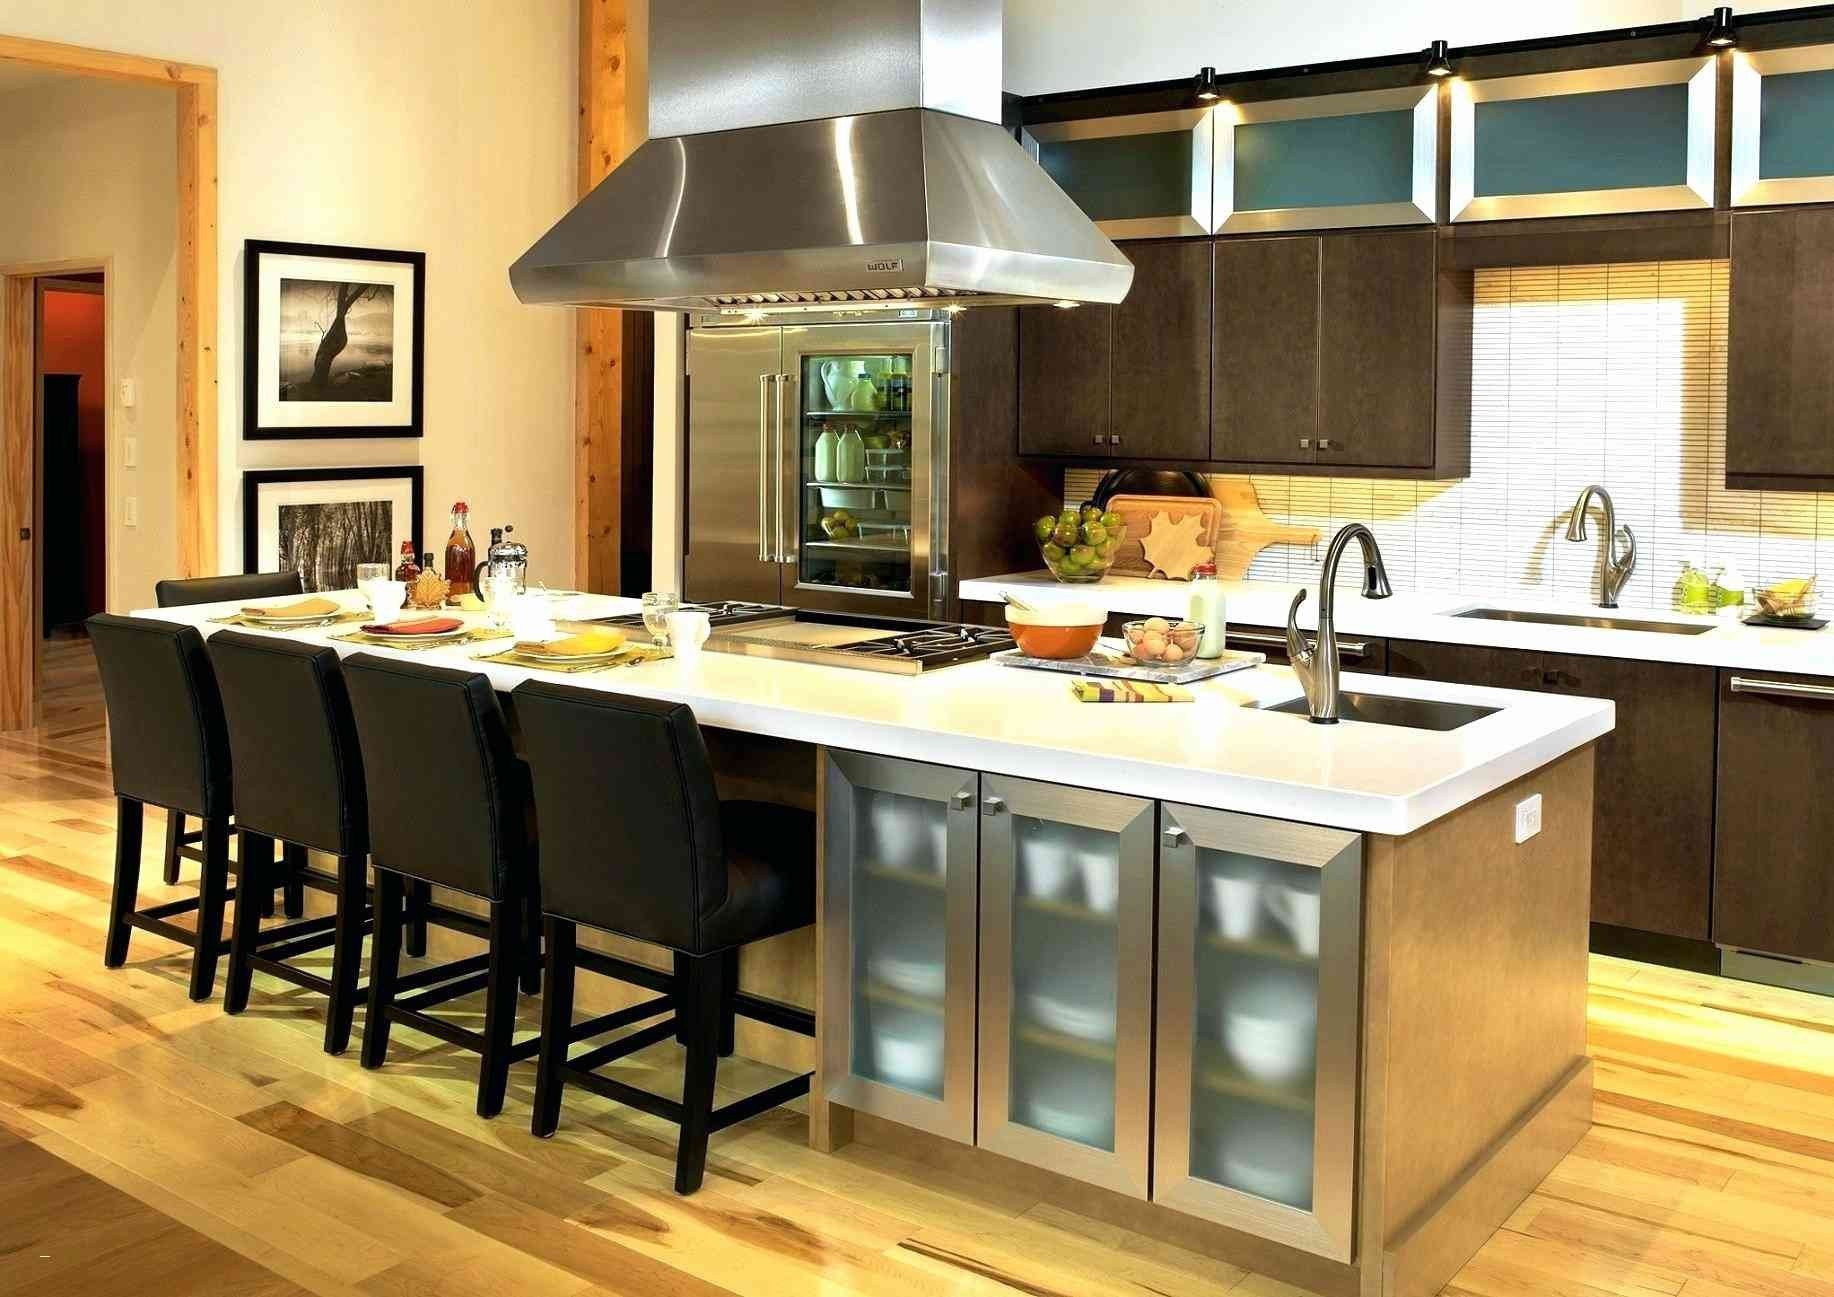 11 Perfect Kitchens with Hardwood Floors and White Cabinets 2024 free download kitchens with hardwood floors and white cabinets of white kitchen with wood island best of kitchen decor ideas kitchen with regard to white kitchen with wood island best of black and white k